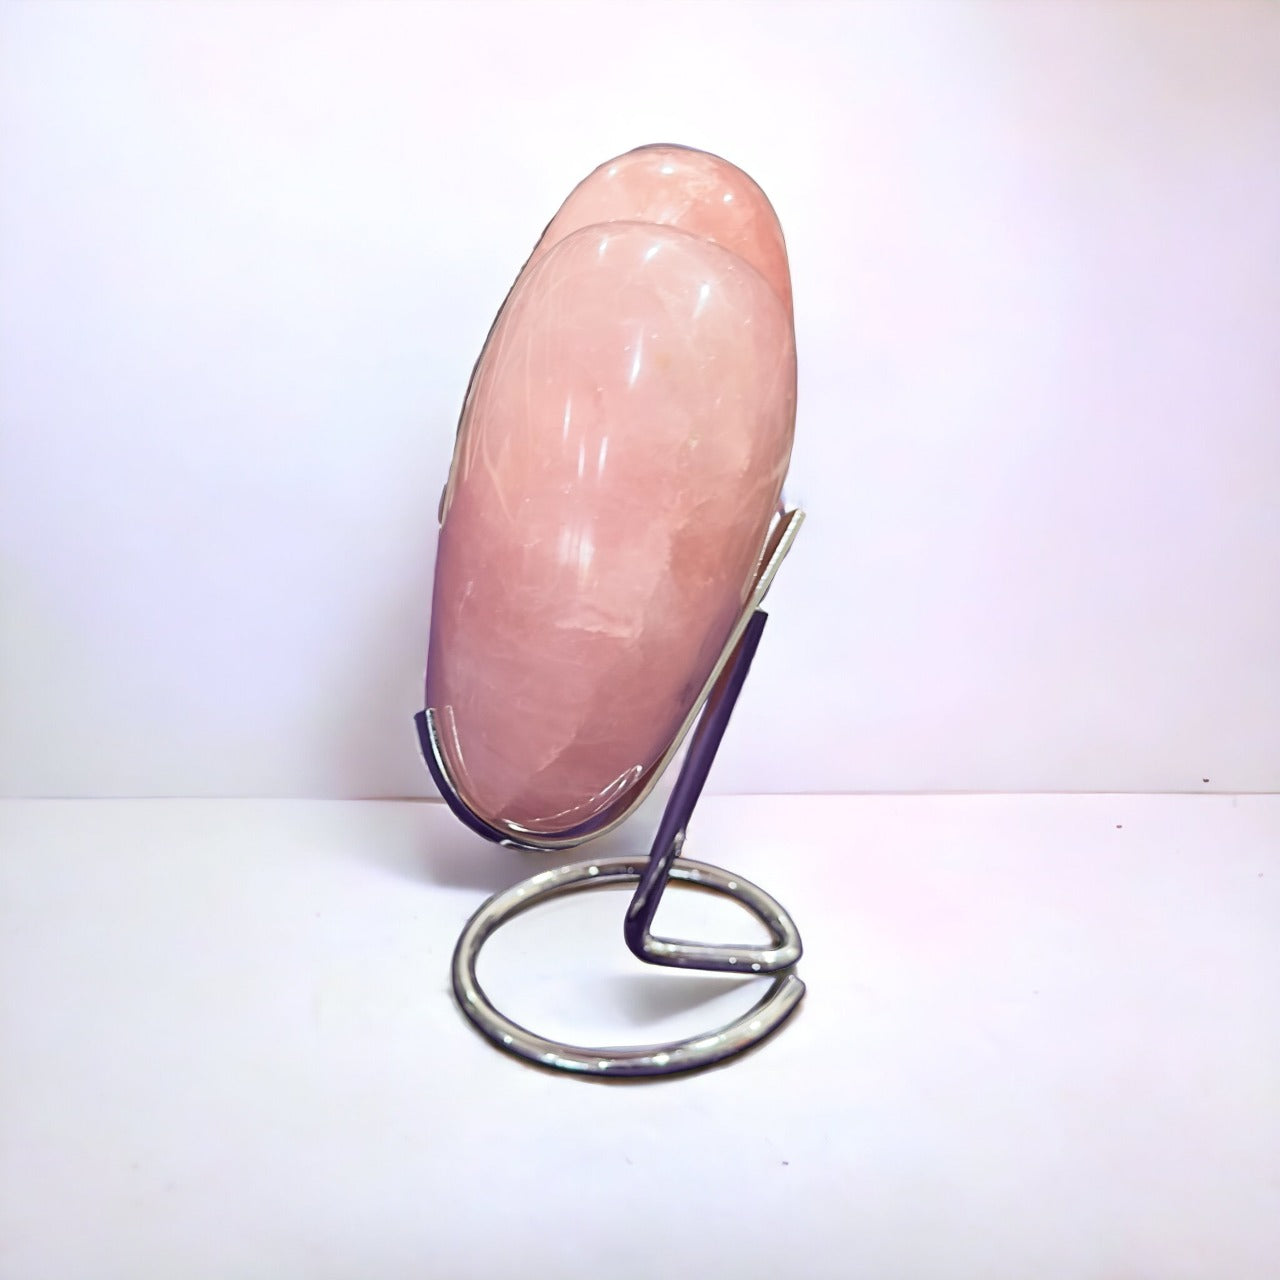 Rose Quartz Heart with Stand | 1.333kg